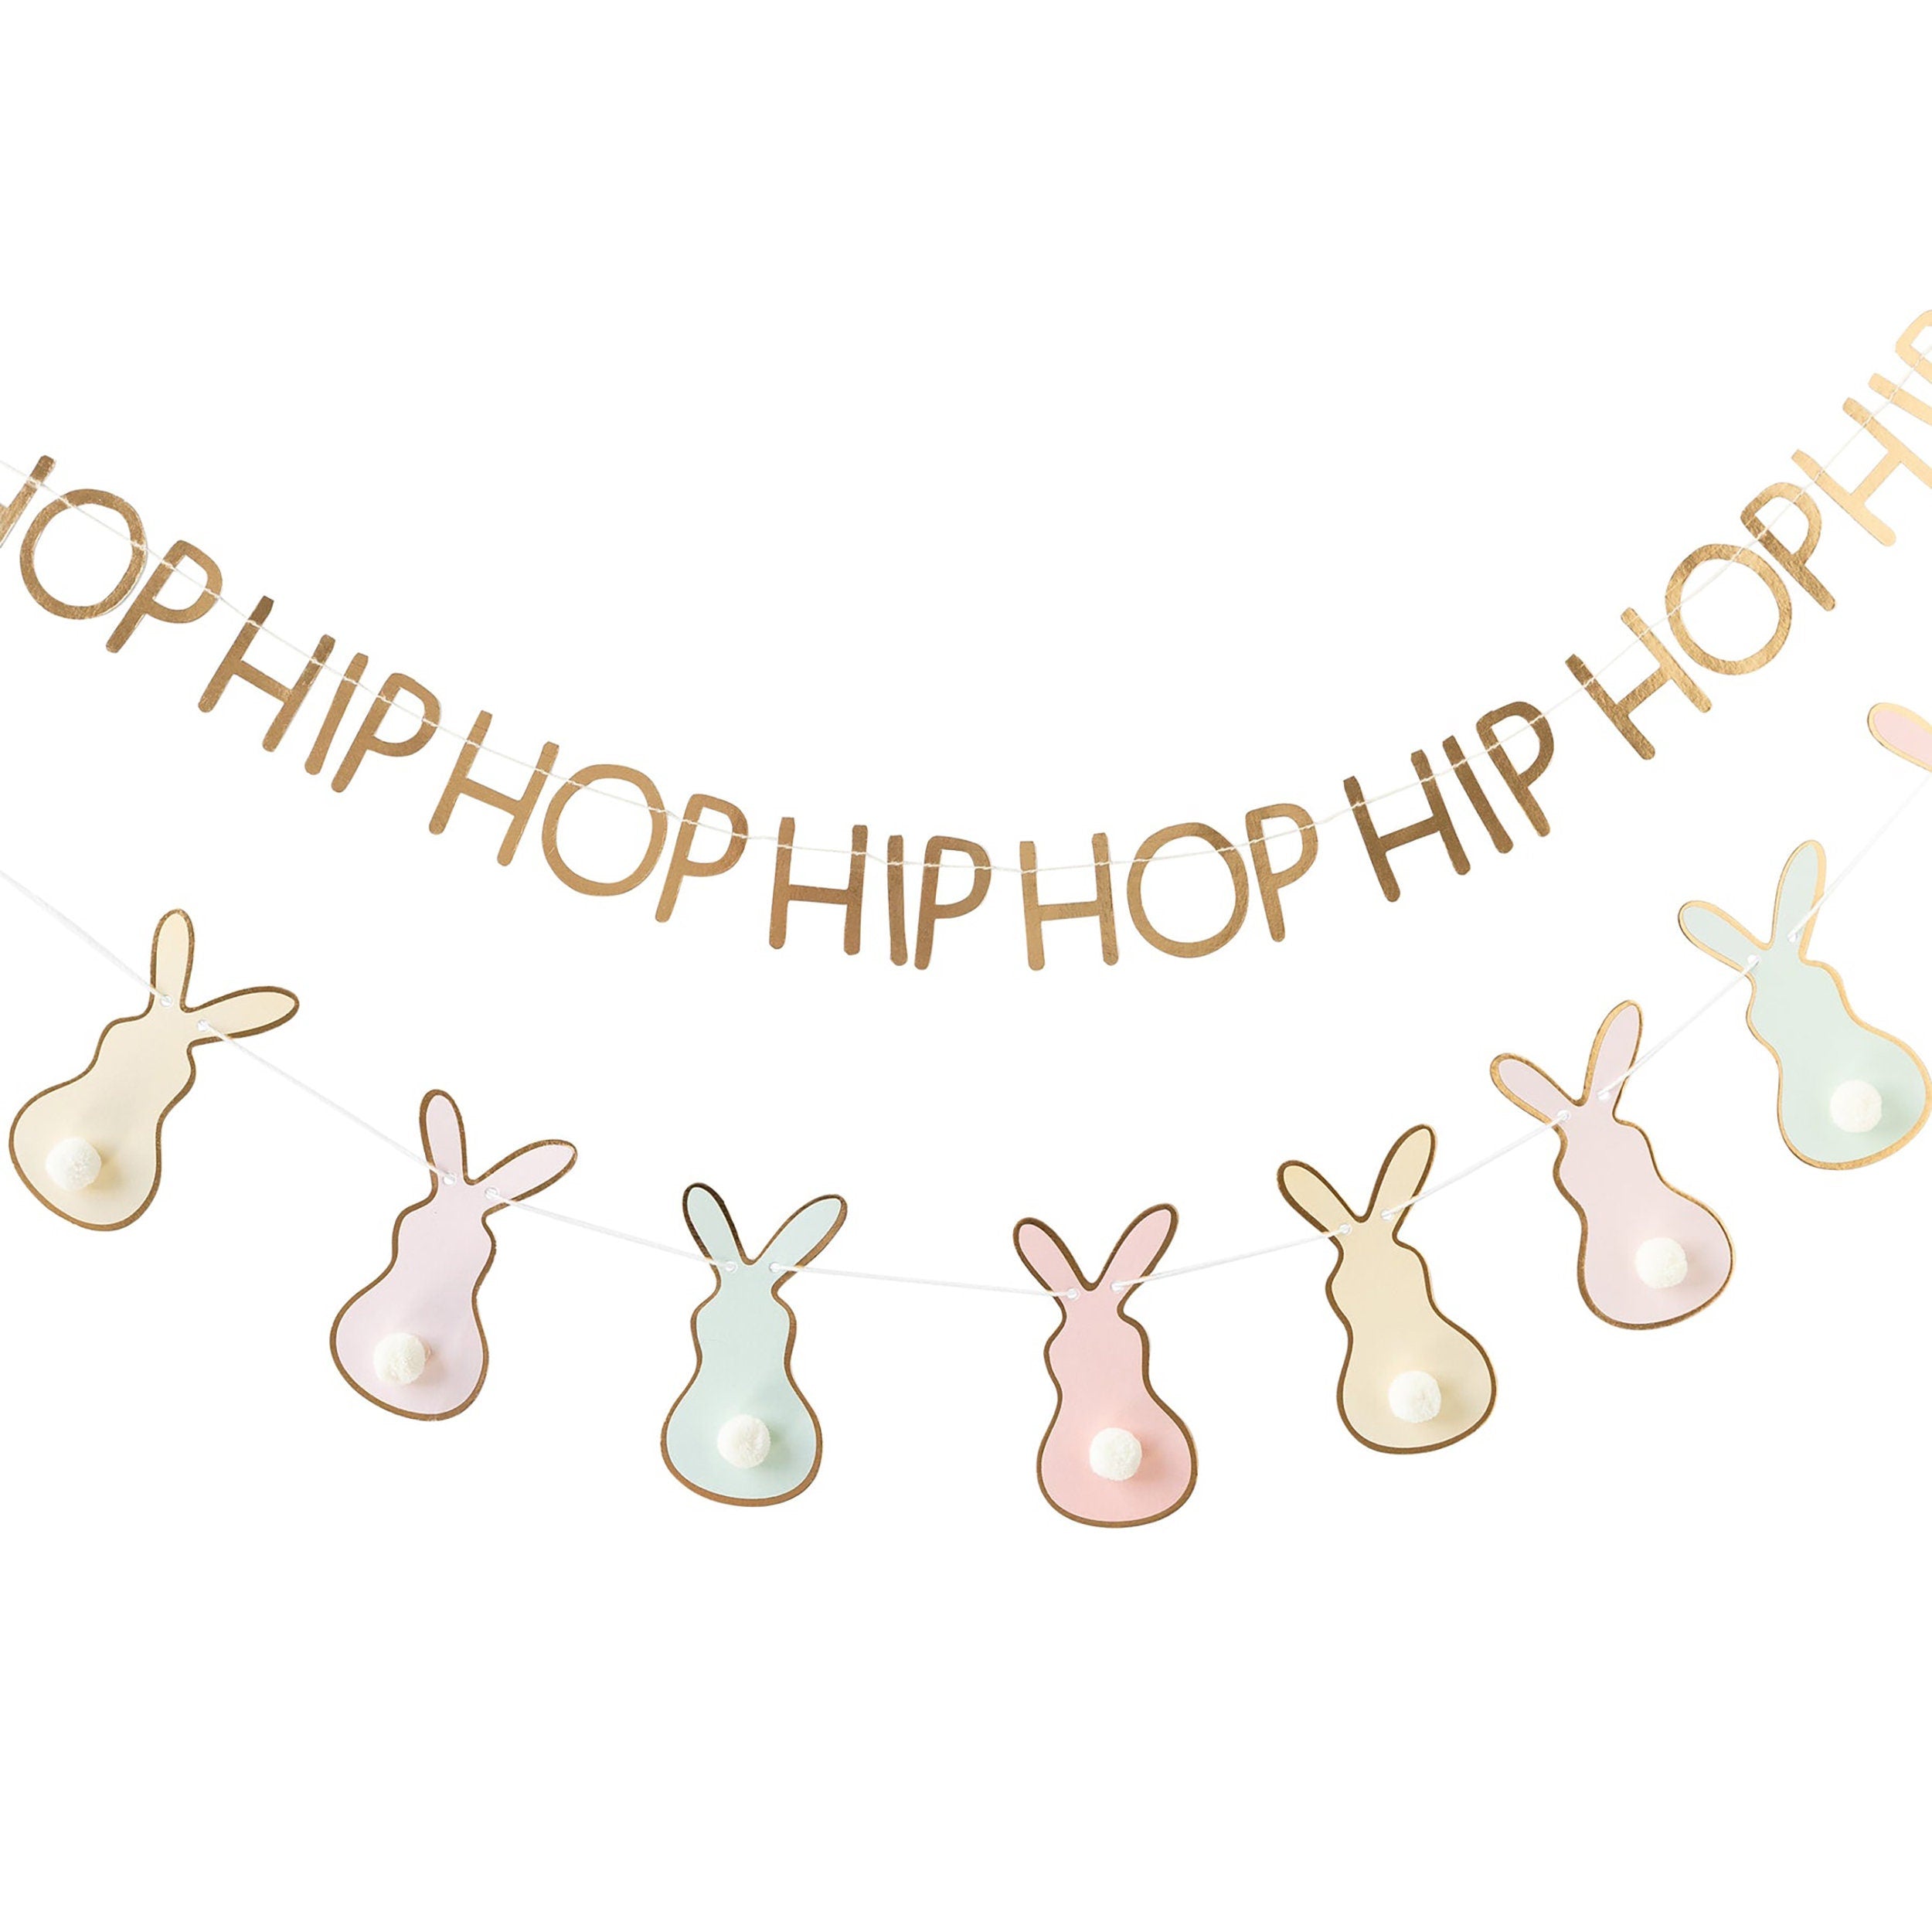 Easter Banners | Easter Bunny Banner - Easter Mantel Decor - Easter Party Decorations - Easter Party Supplies - Bunny Decorations